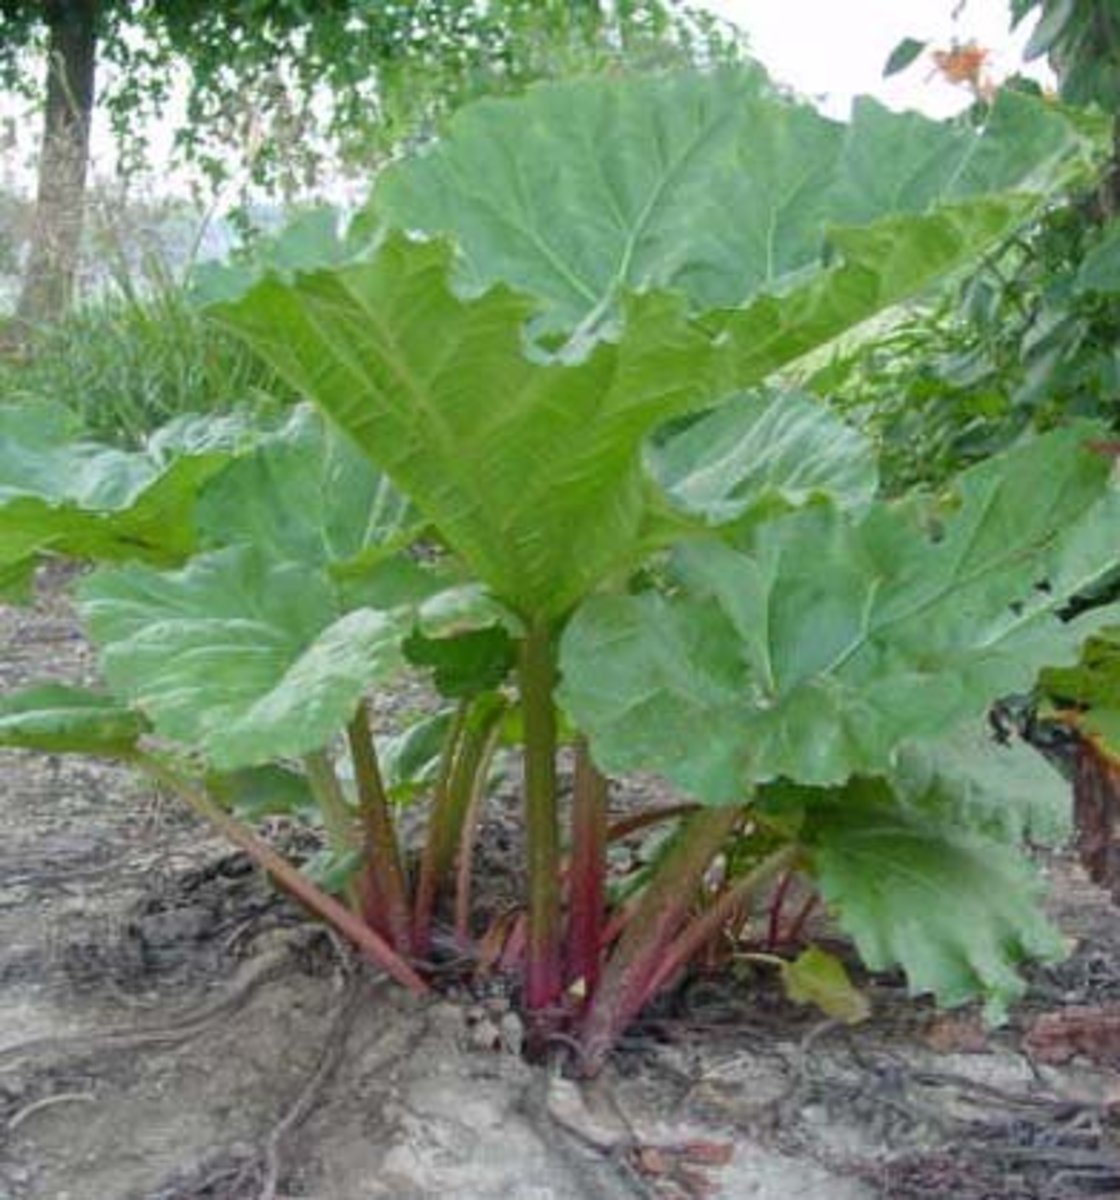 A typical mid-spring rhubarb plant. These plants need virtually no cultivation and small care once they are established.